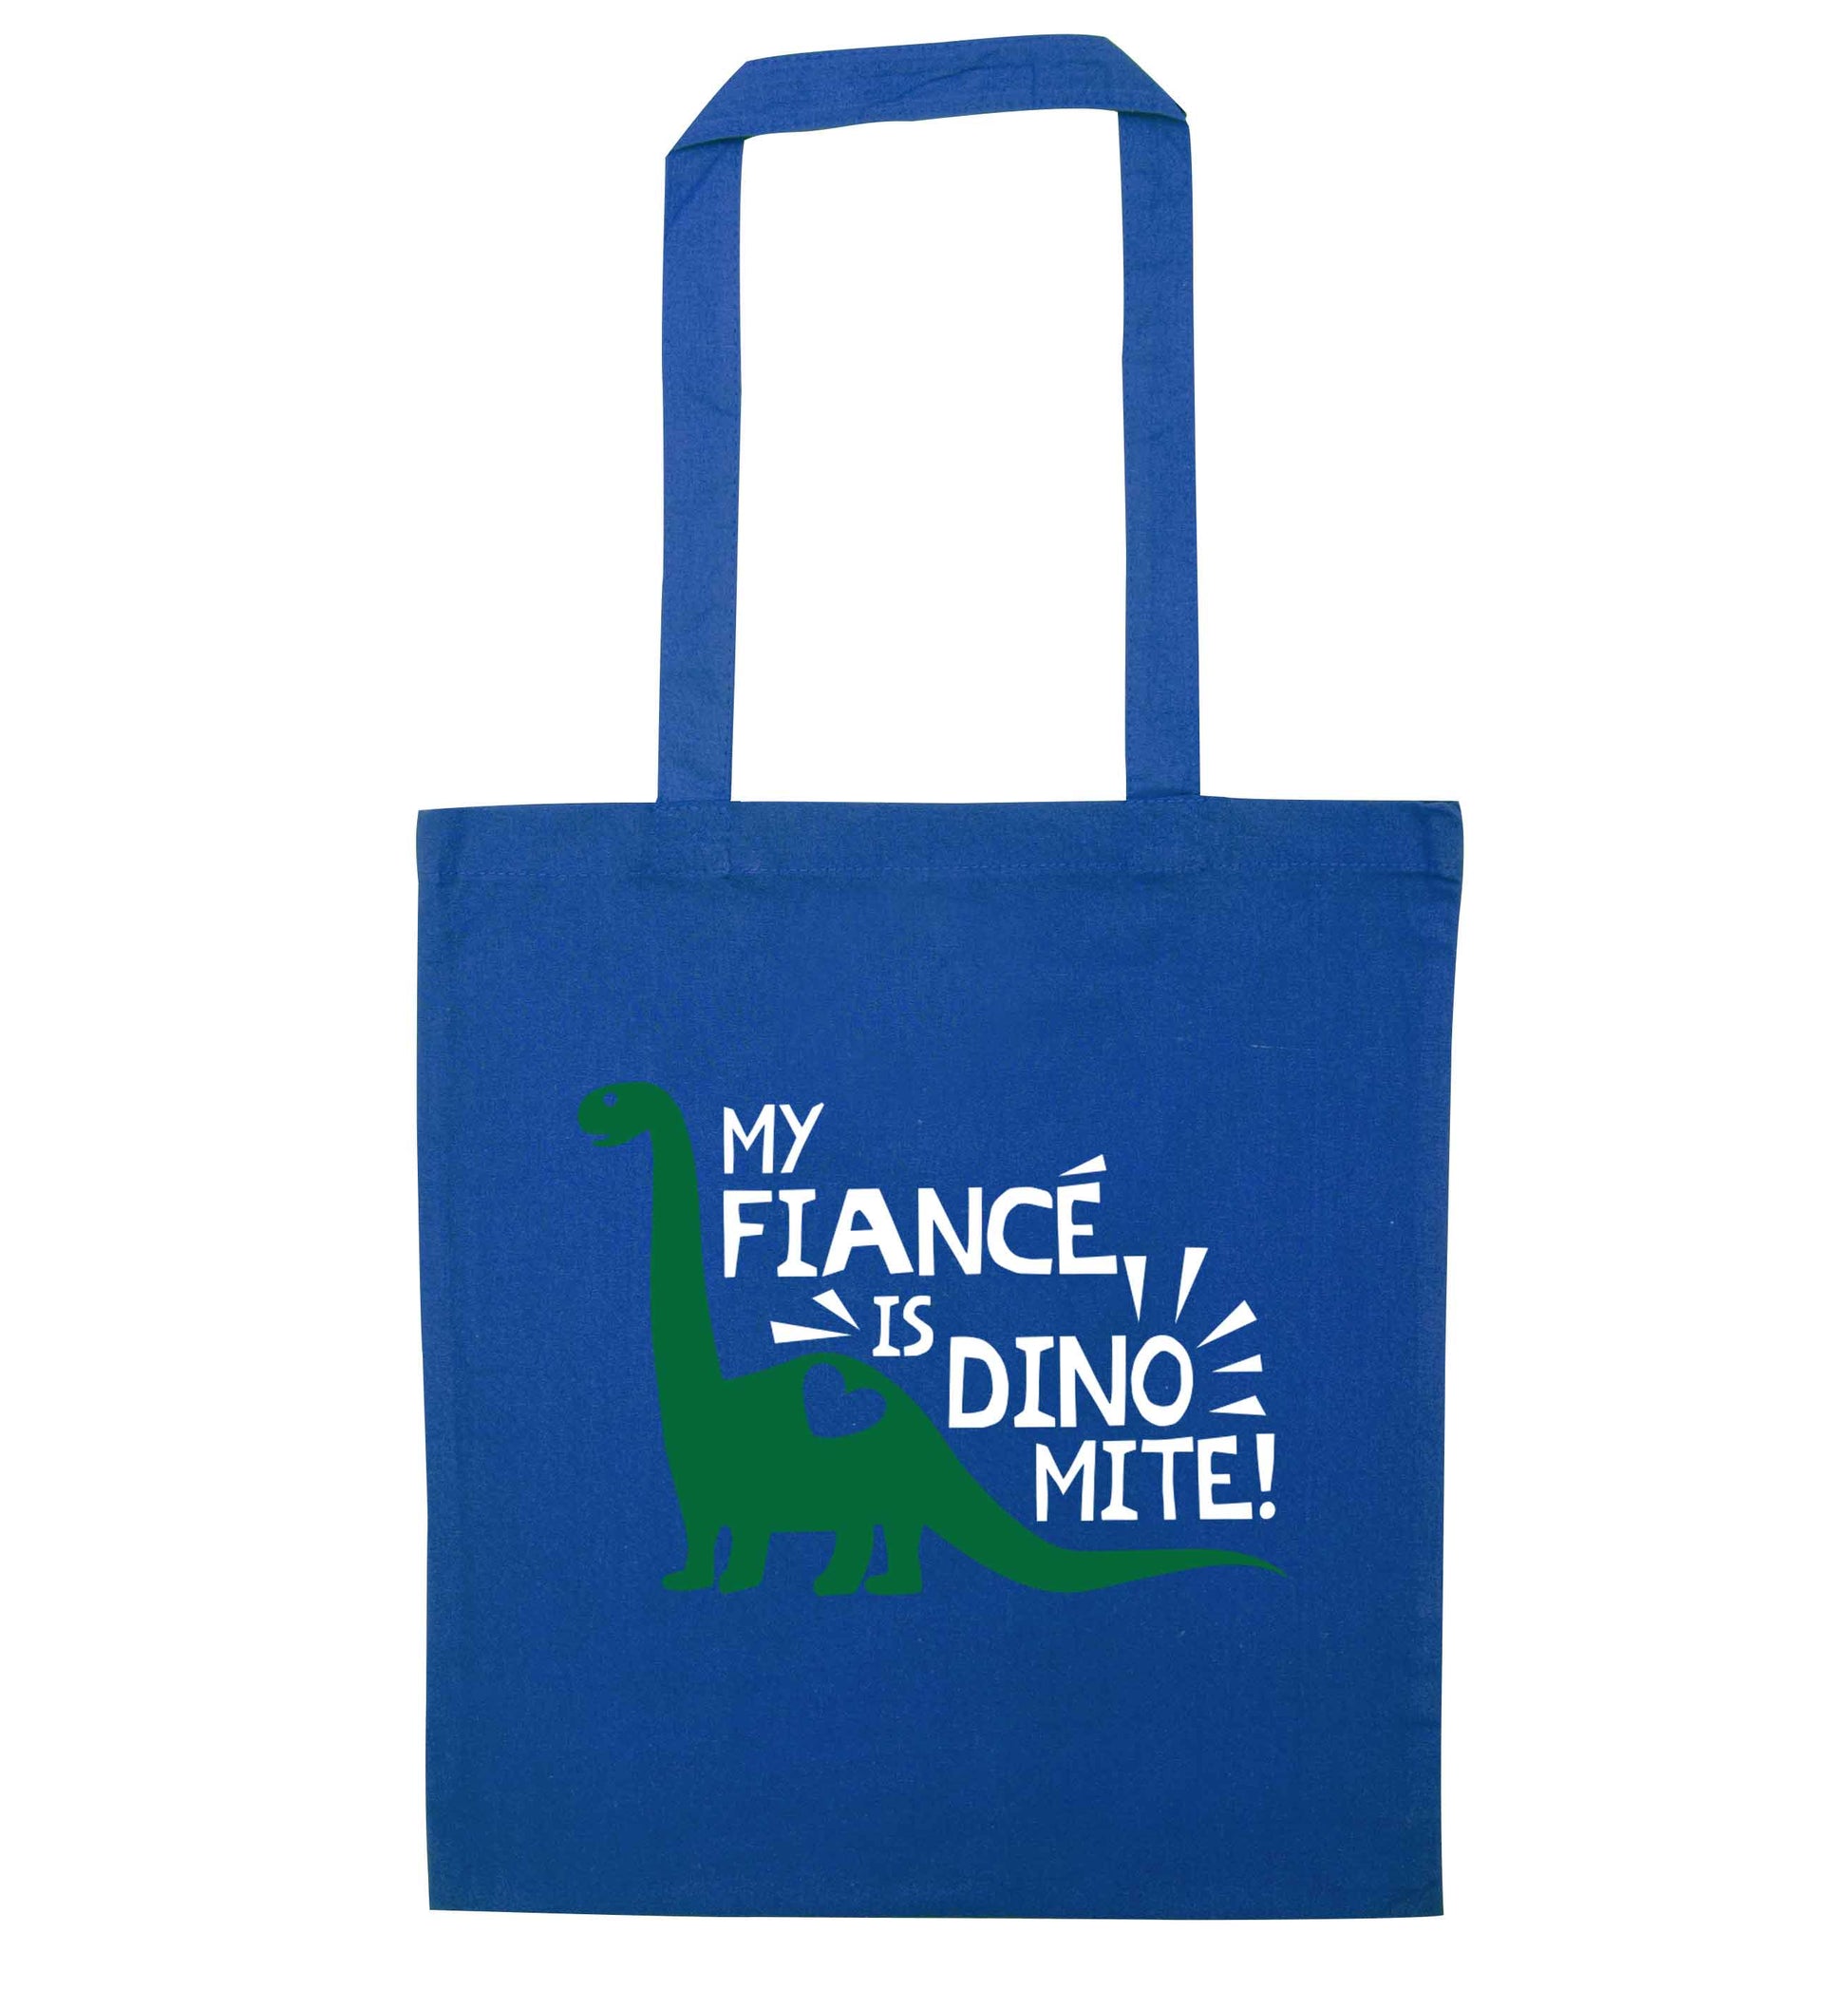 My fiance is dinomite! blue tote bag